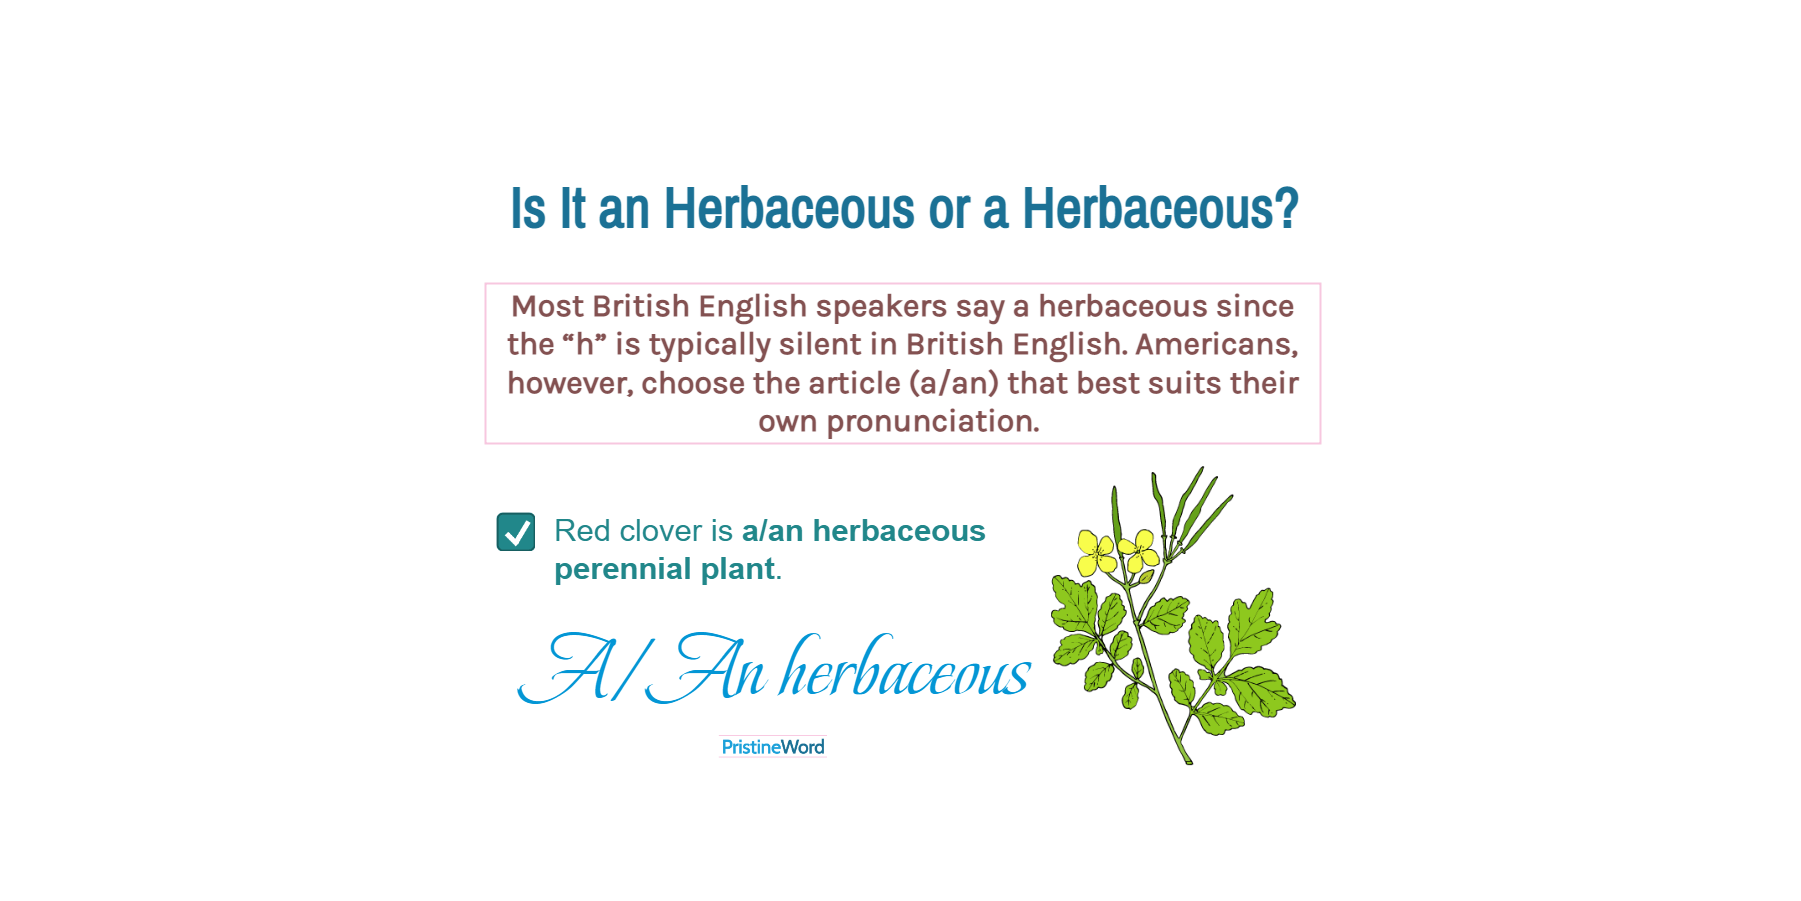 Is It a Herbaceous or an Herbaceous?